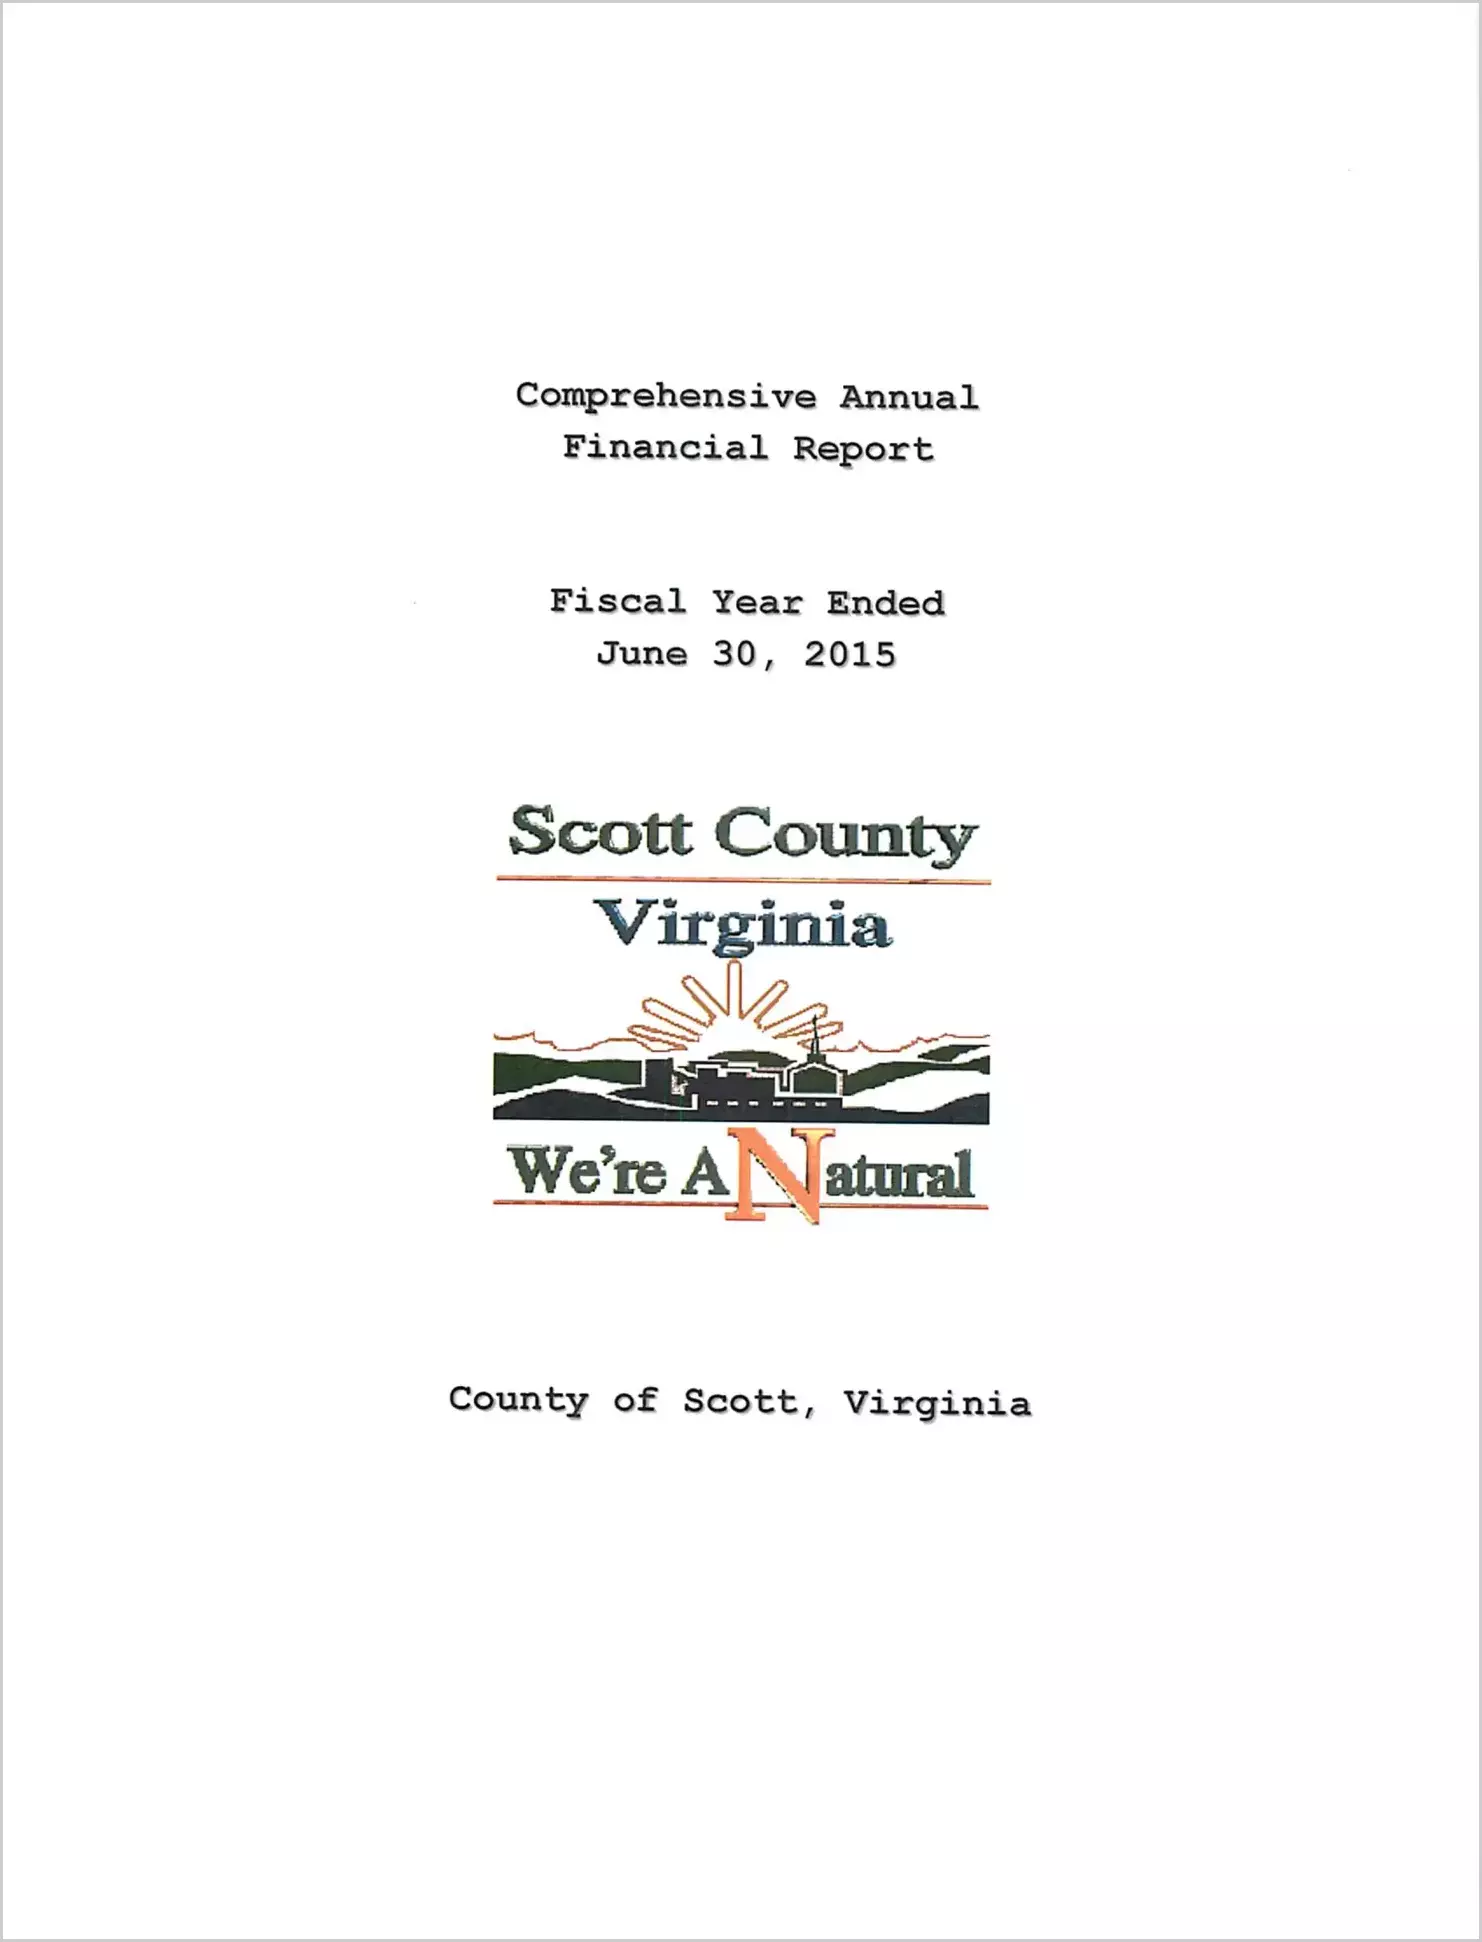 2015 Annual Financial Report for County of Scott